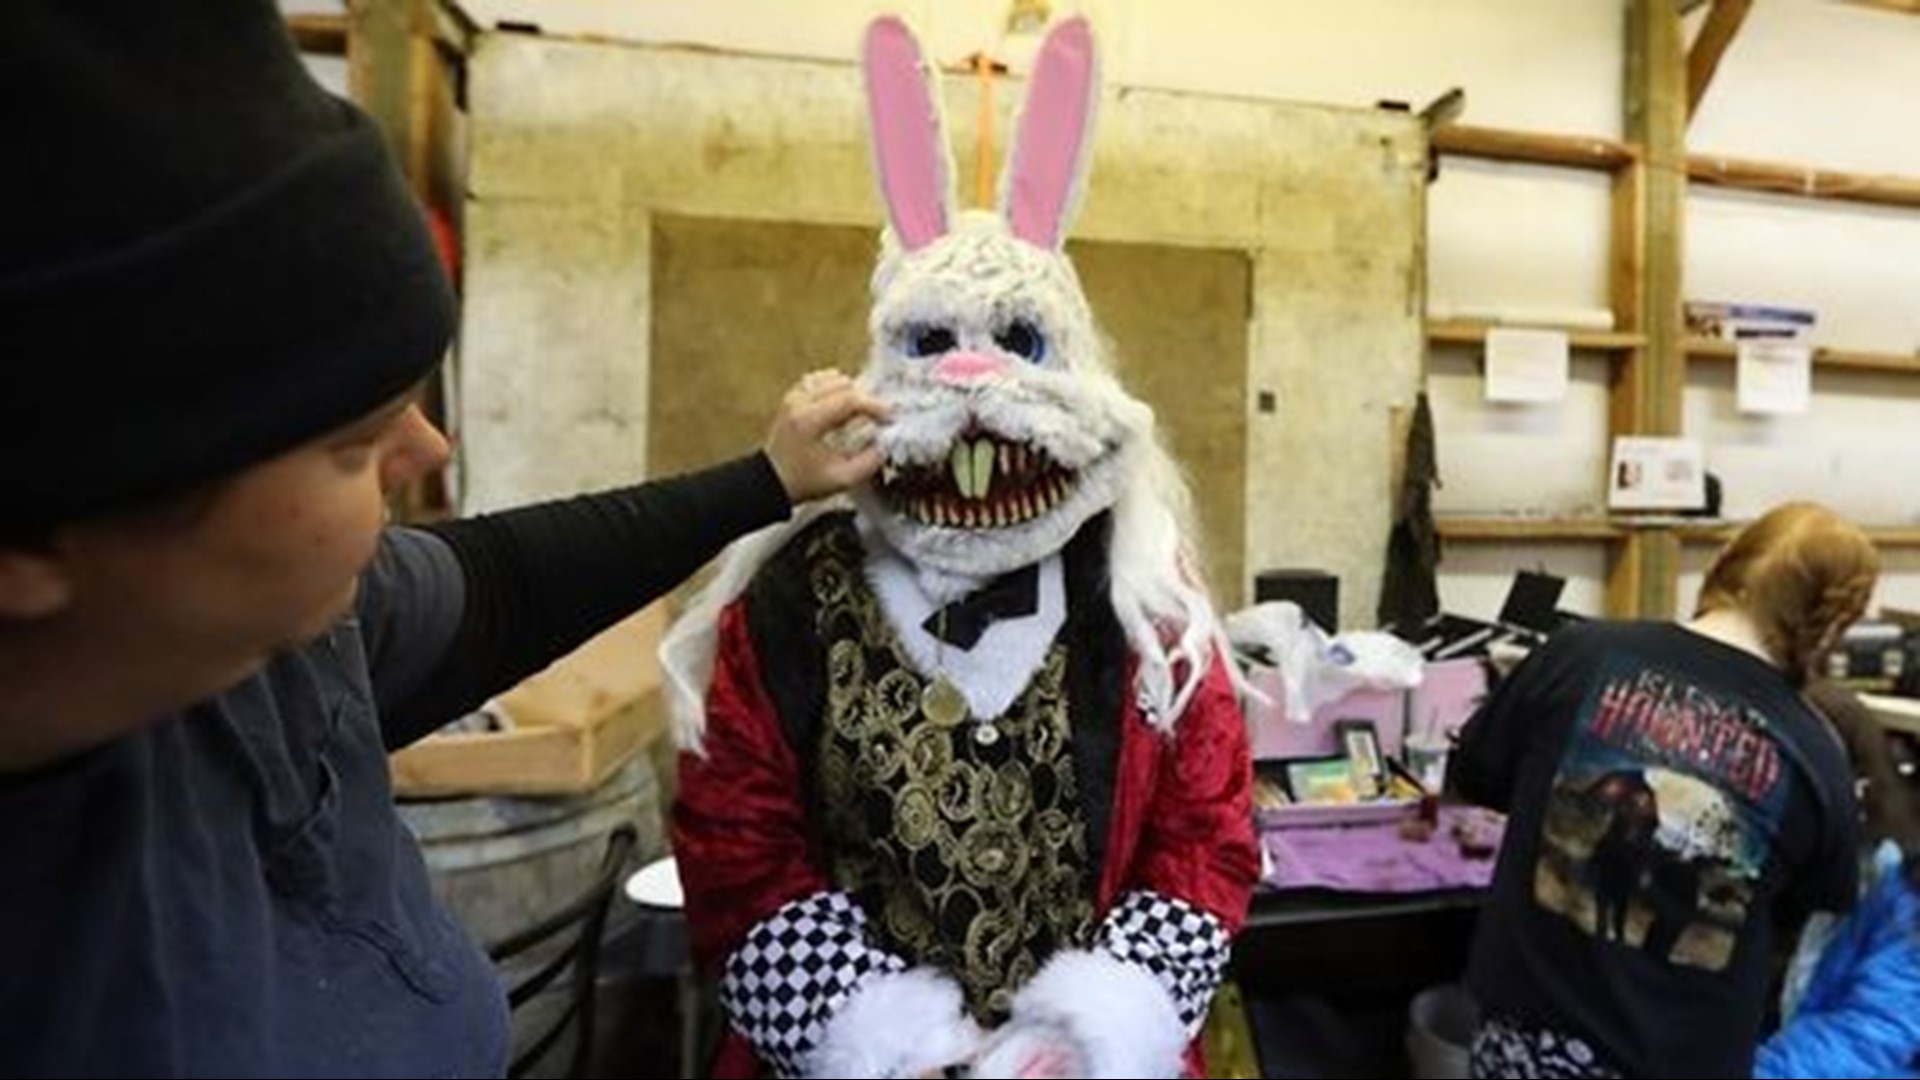 Kitsap Haunted Fairgrounds promises a ghoulishly good scare